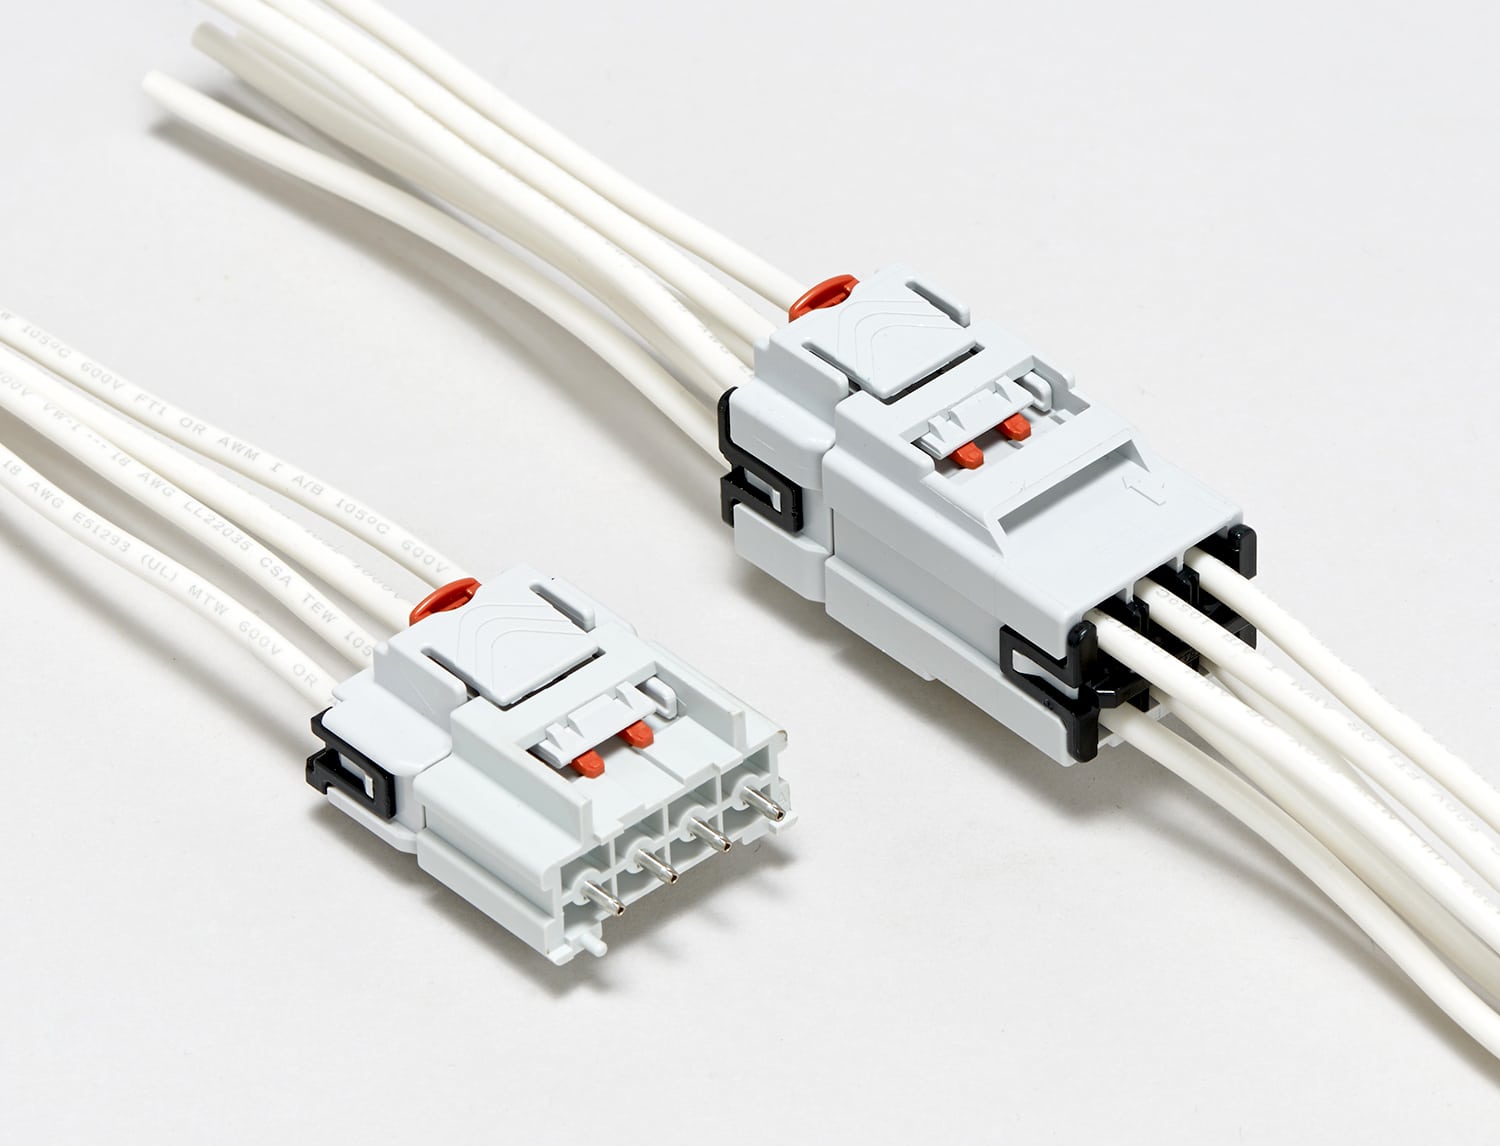 TE Connectivity’s POWER TRIPLE LOCK connector system delivers fast, accurate connections and high-reliability performance